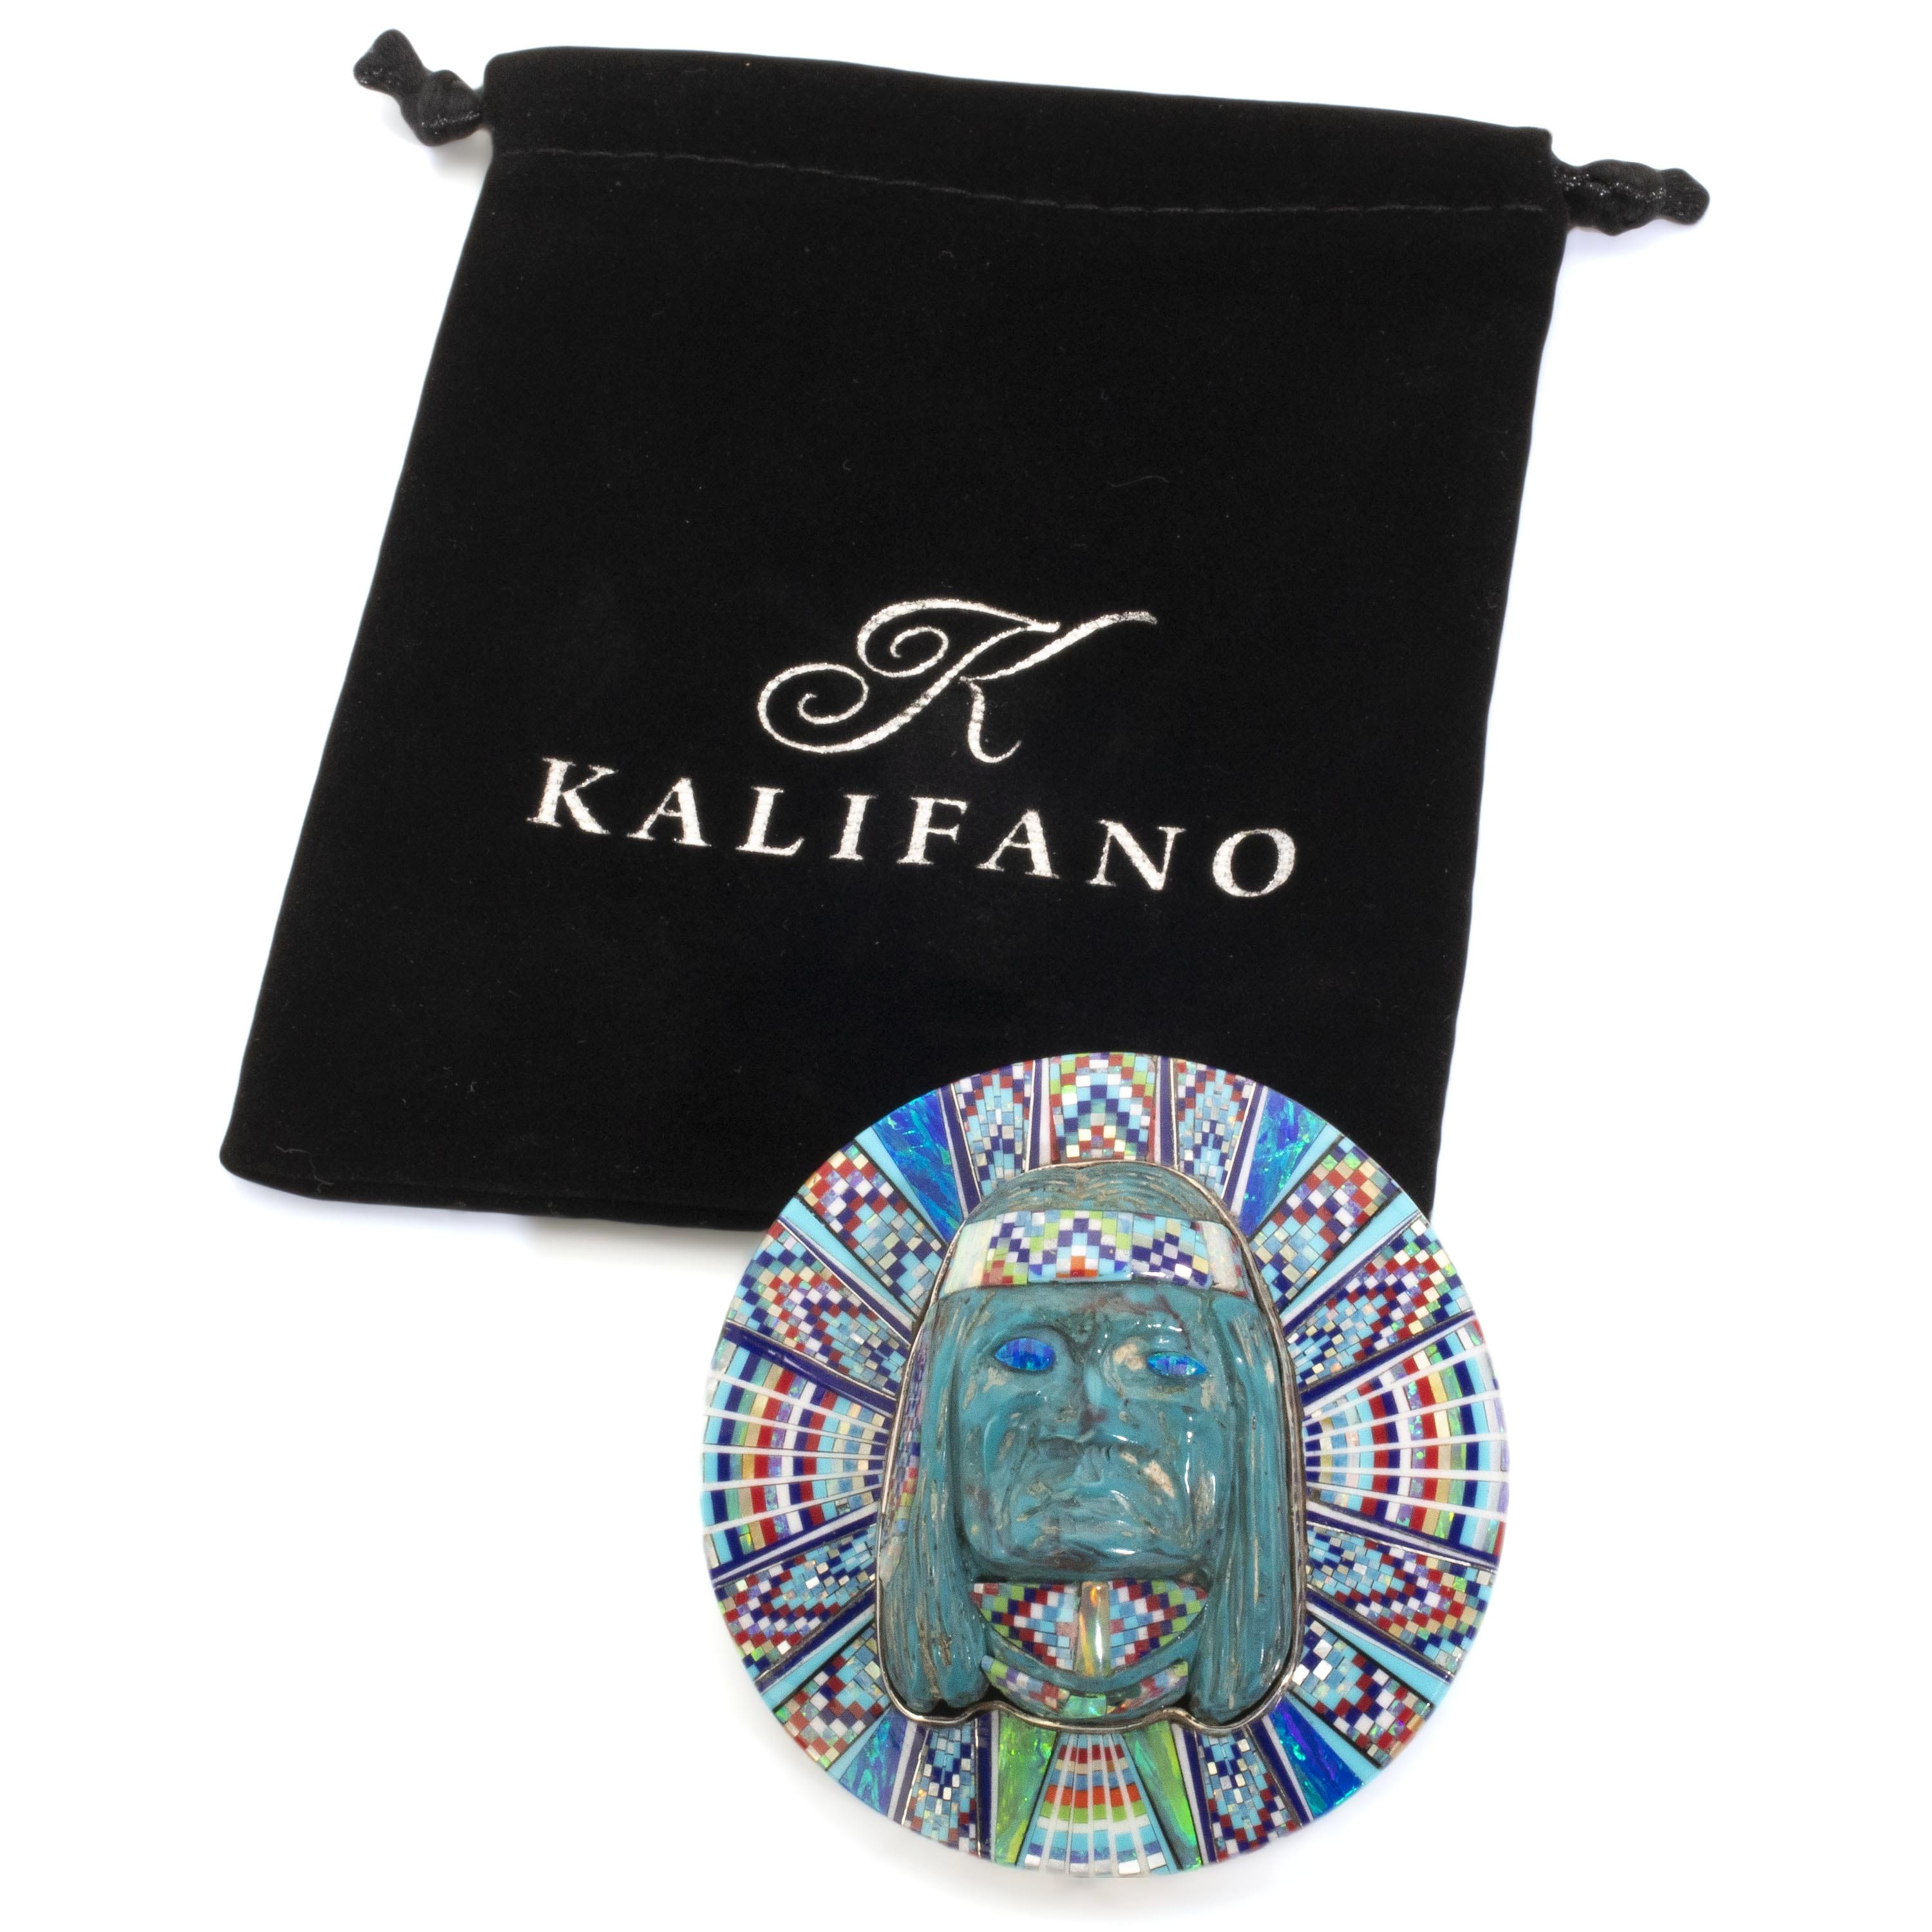 KALIFANO Southwest Silver Jewelry Multi Gem Opal Micro Inlay with Genuine Turquoise Indian Chief Handmade 925 Sterling Silver Circular Belt Buckle AKBB2400.003